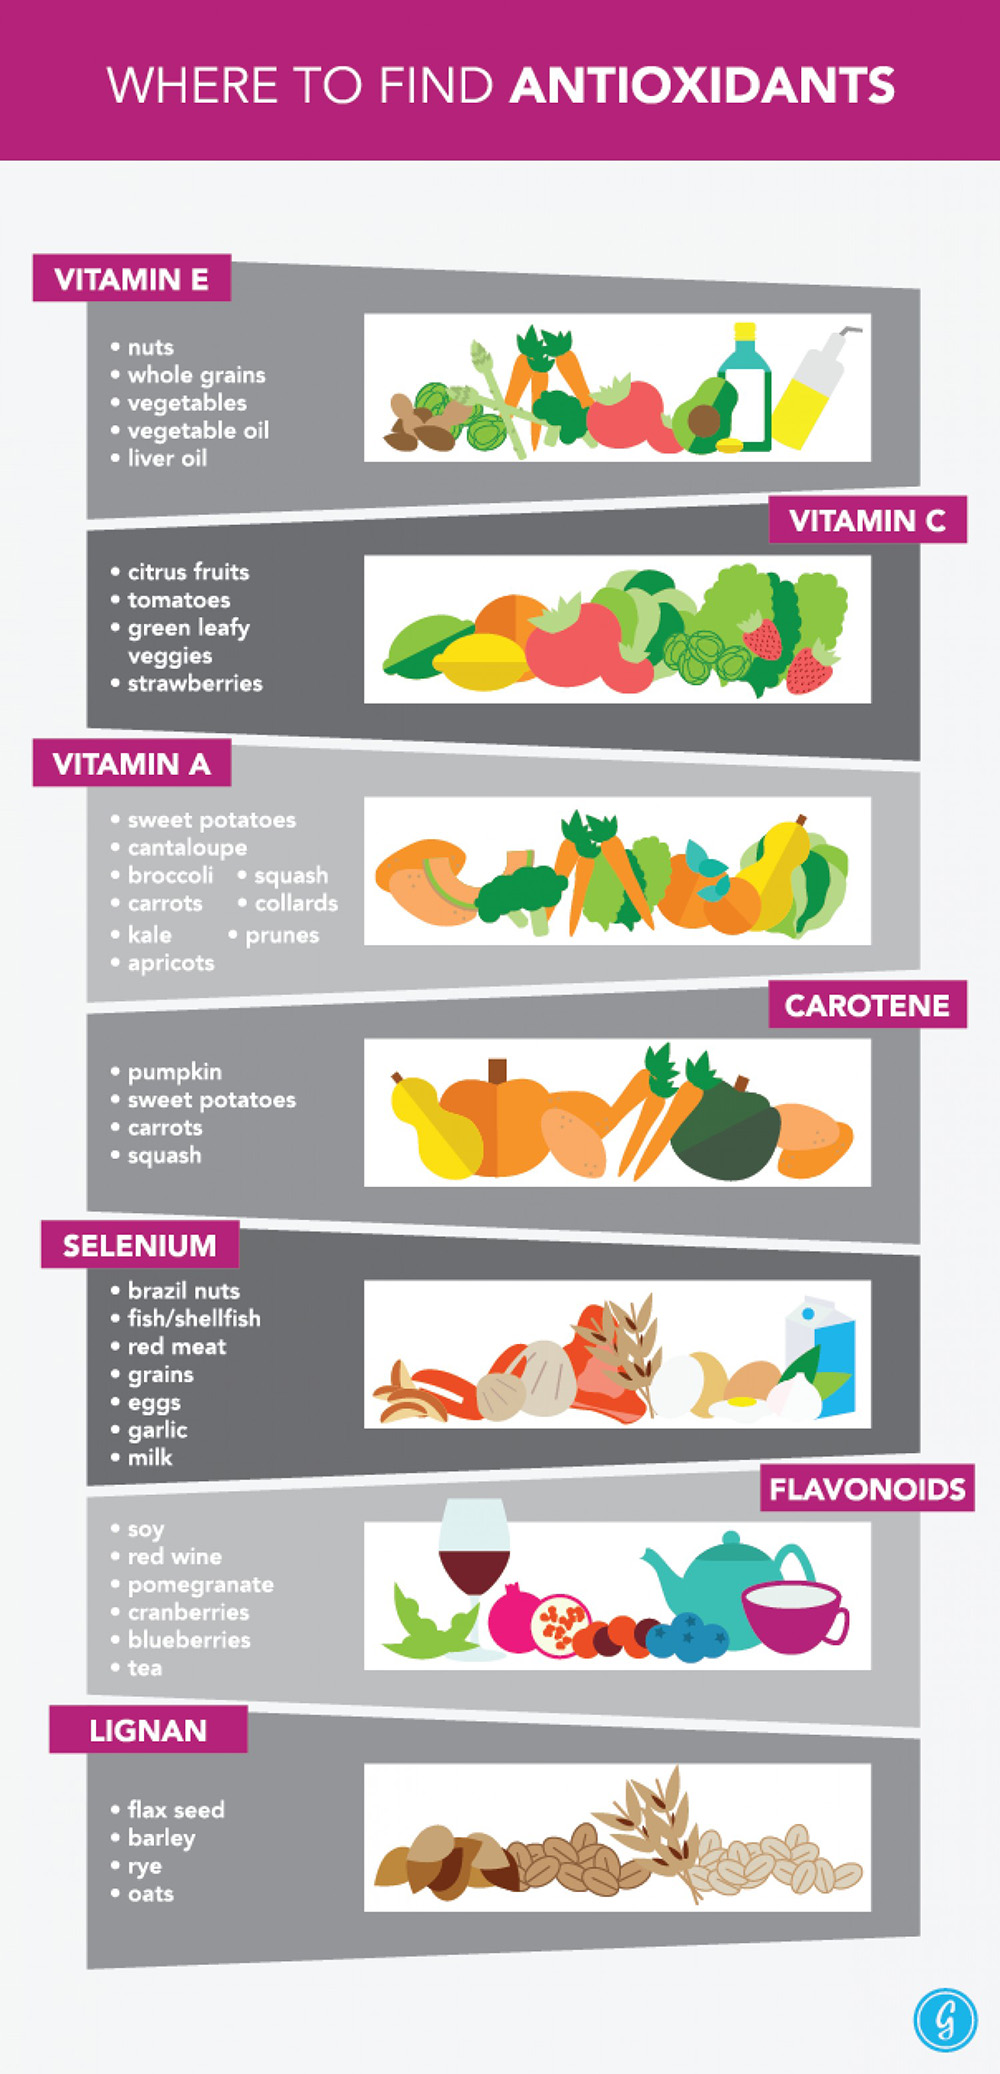 where-to-find-antioxidants_52f014592ca51_w1500.png